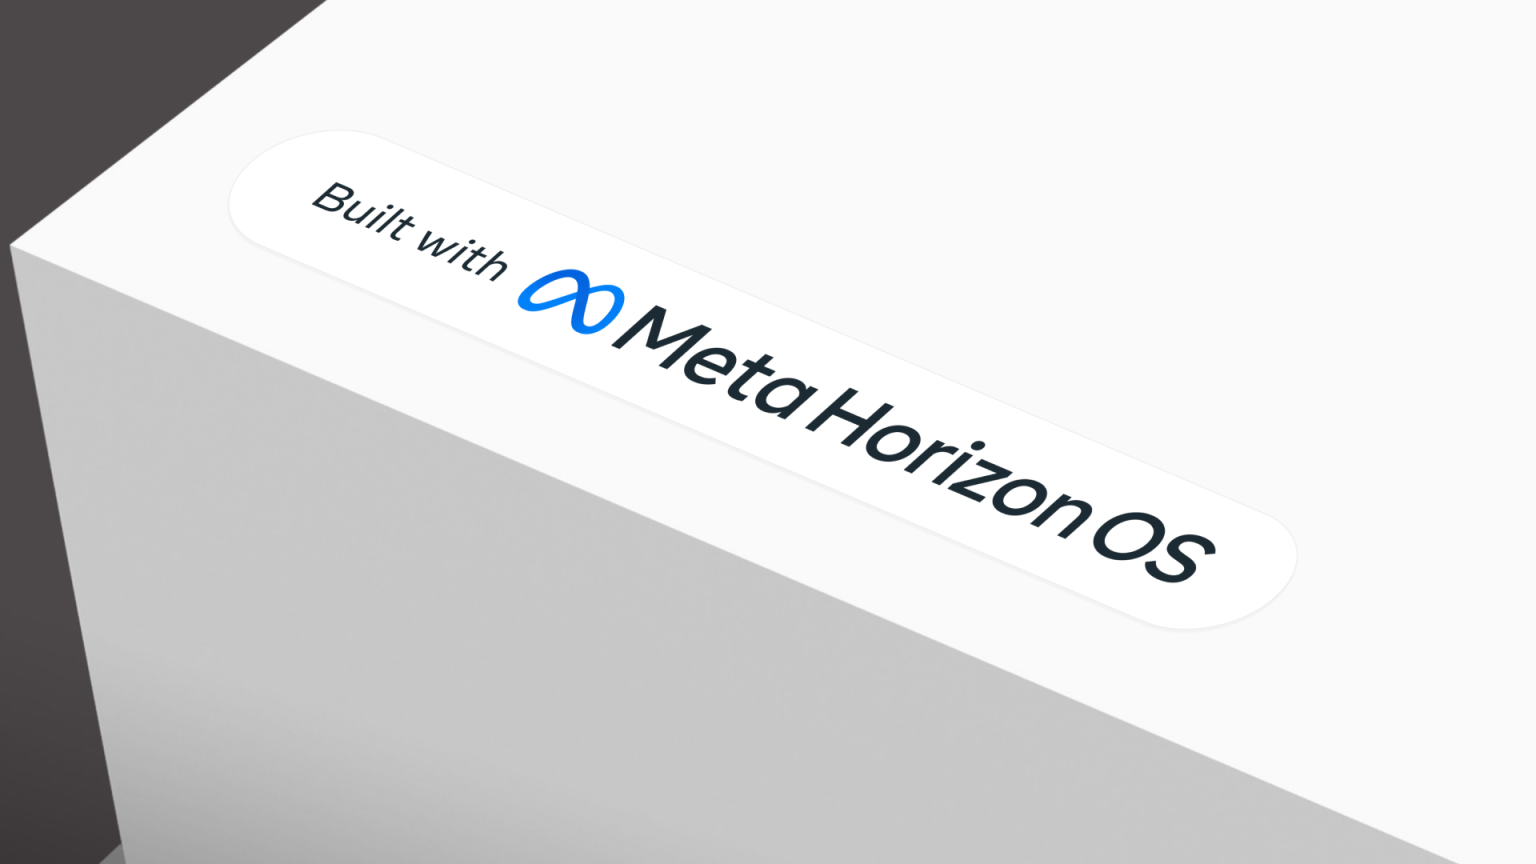 Image showing a box labeled 'Built with Meta Horizon OS'